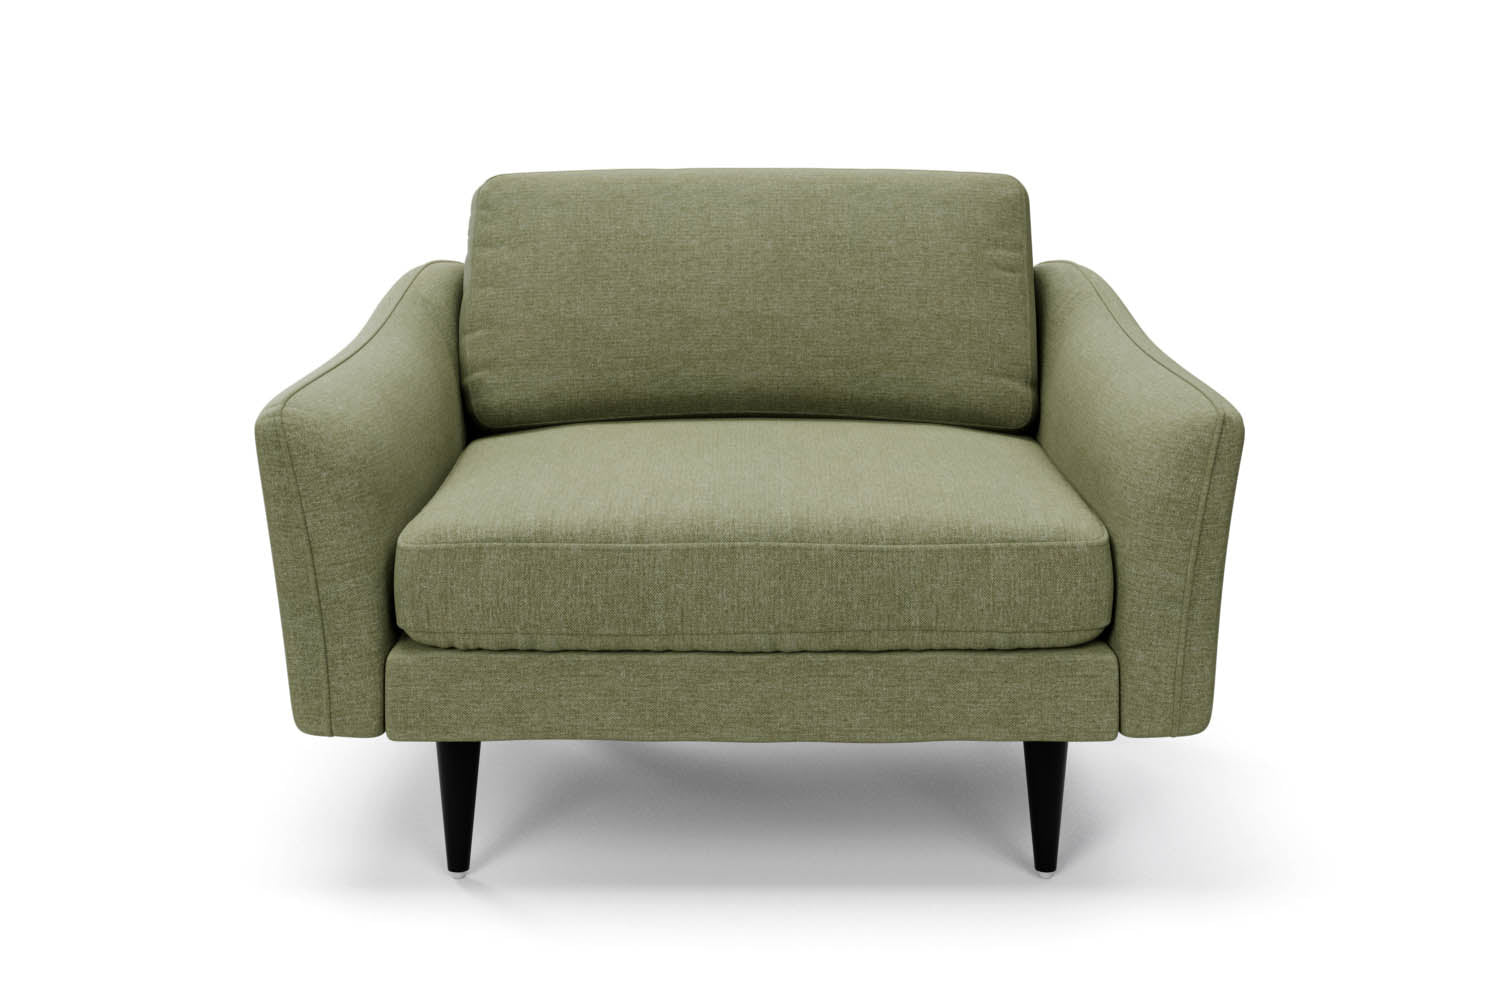 The Rebel Snuggler Sofa in Sage with black legs front variant_40886316335152